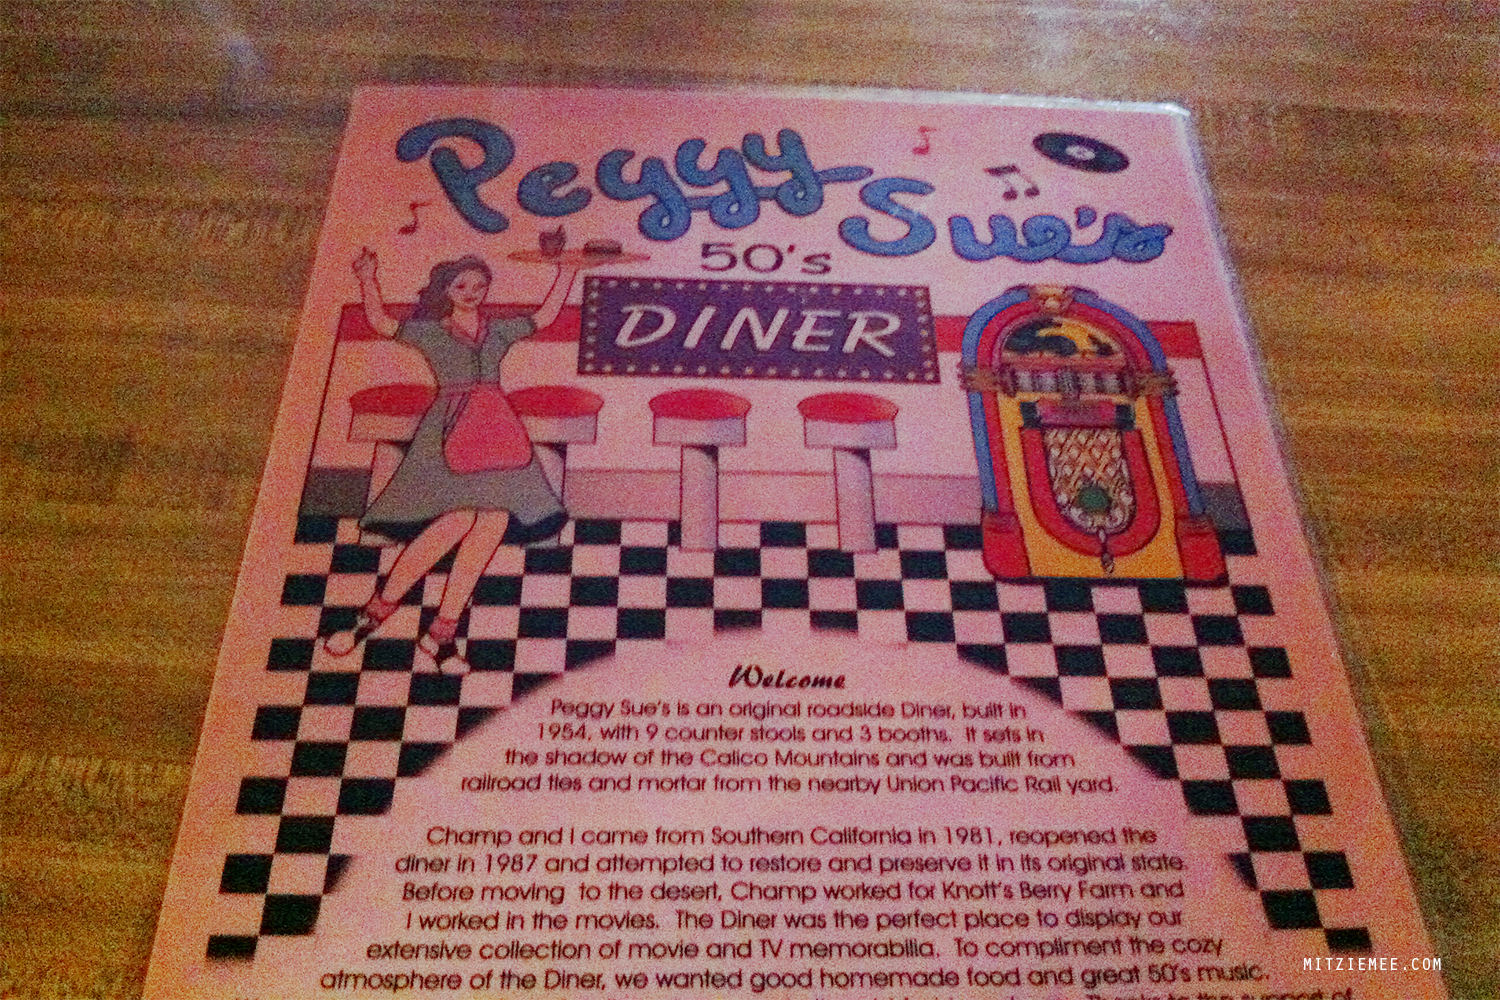 Peggy Sue's Diner, Driving to Las Vegas